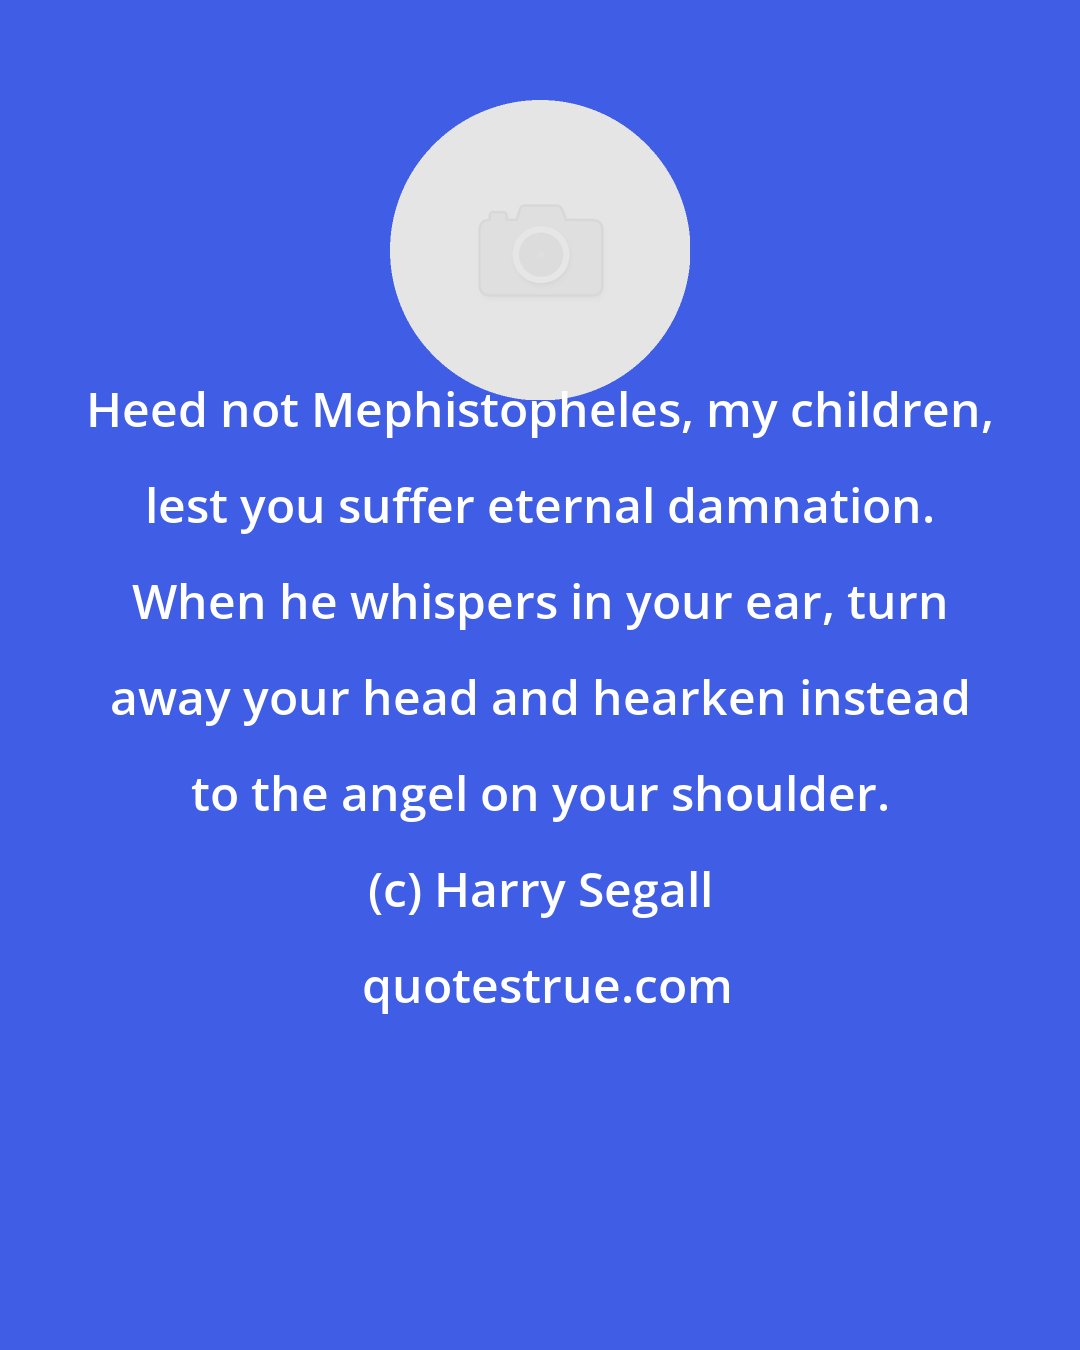 Harry Segall: Heed not Mephistopheles, my children, lest you suffer eternal damnation. When he whispers in your ear, turn away your head and hearken instead to the angel on your shoulder.